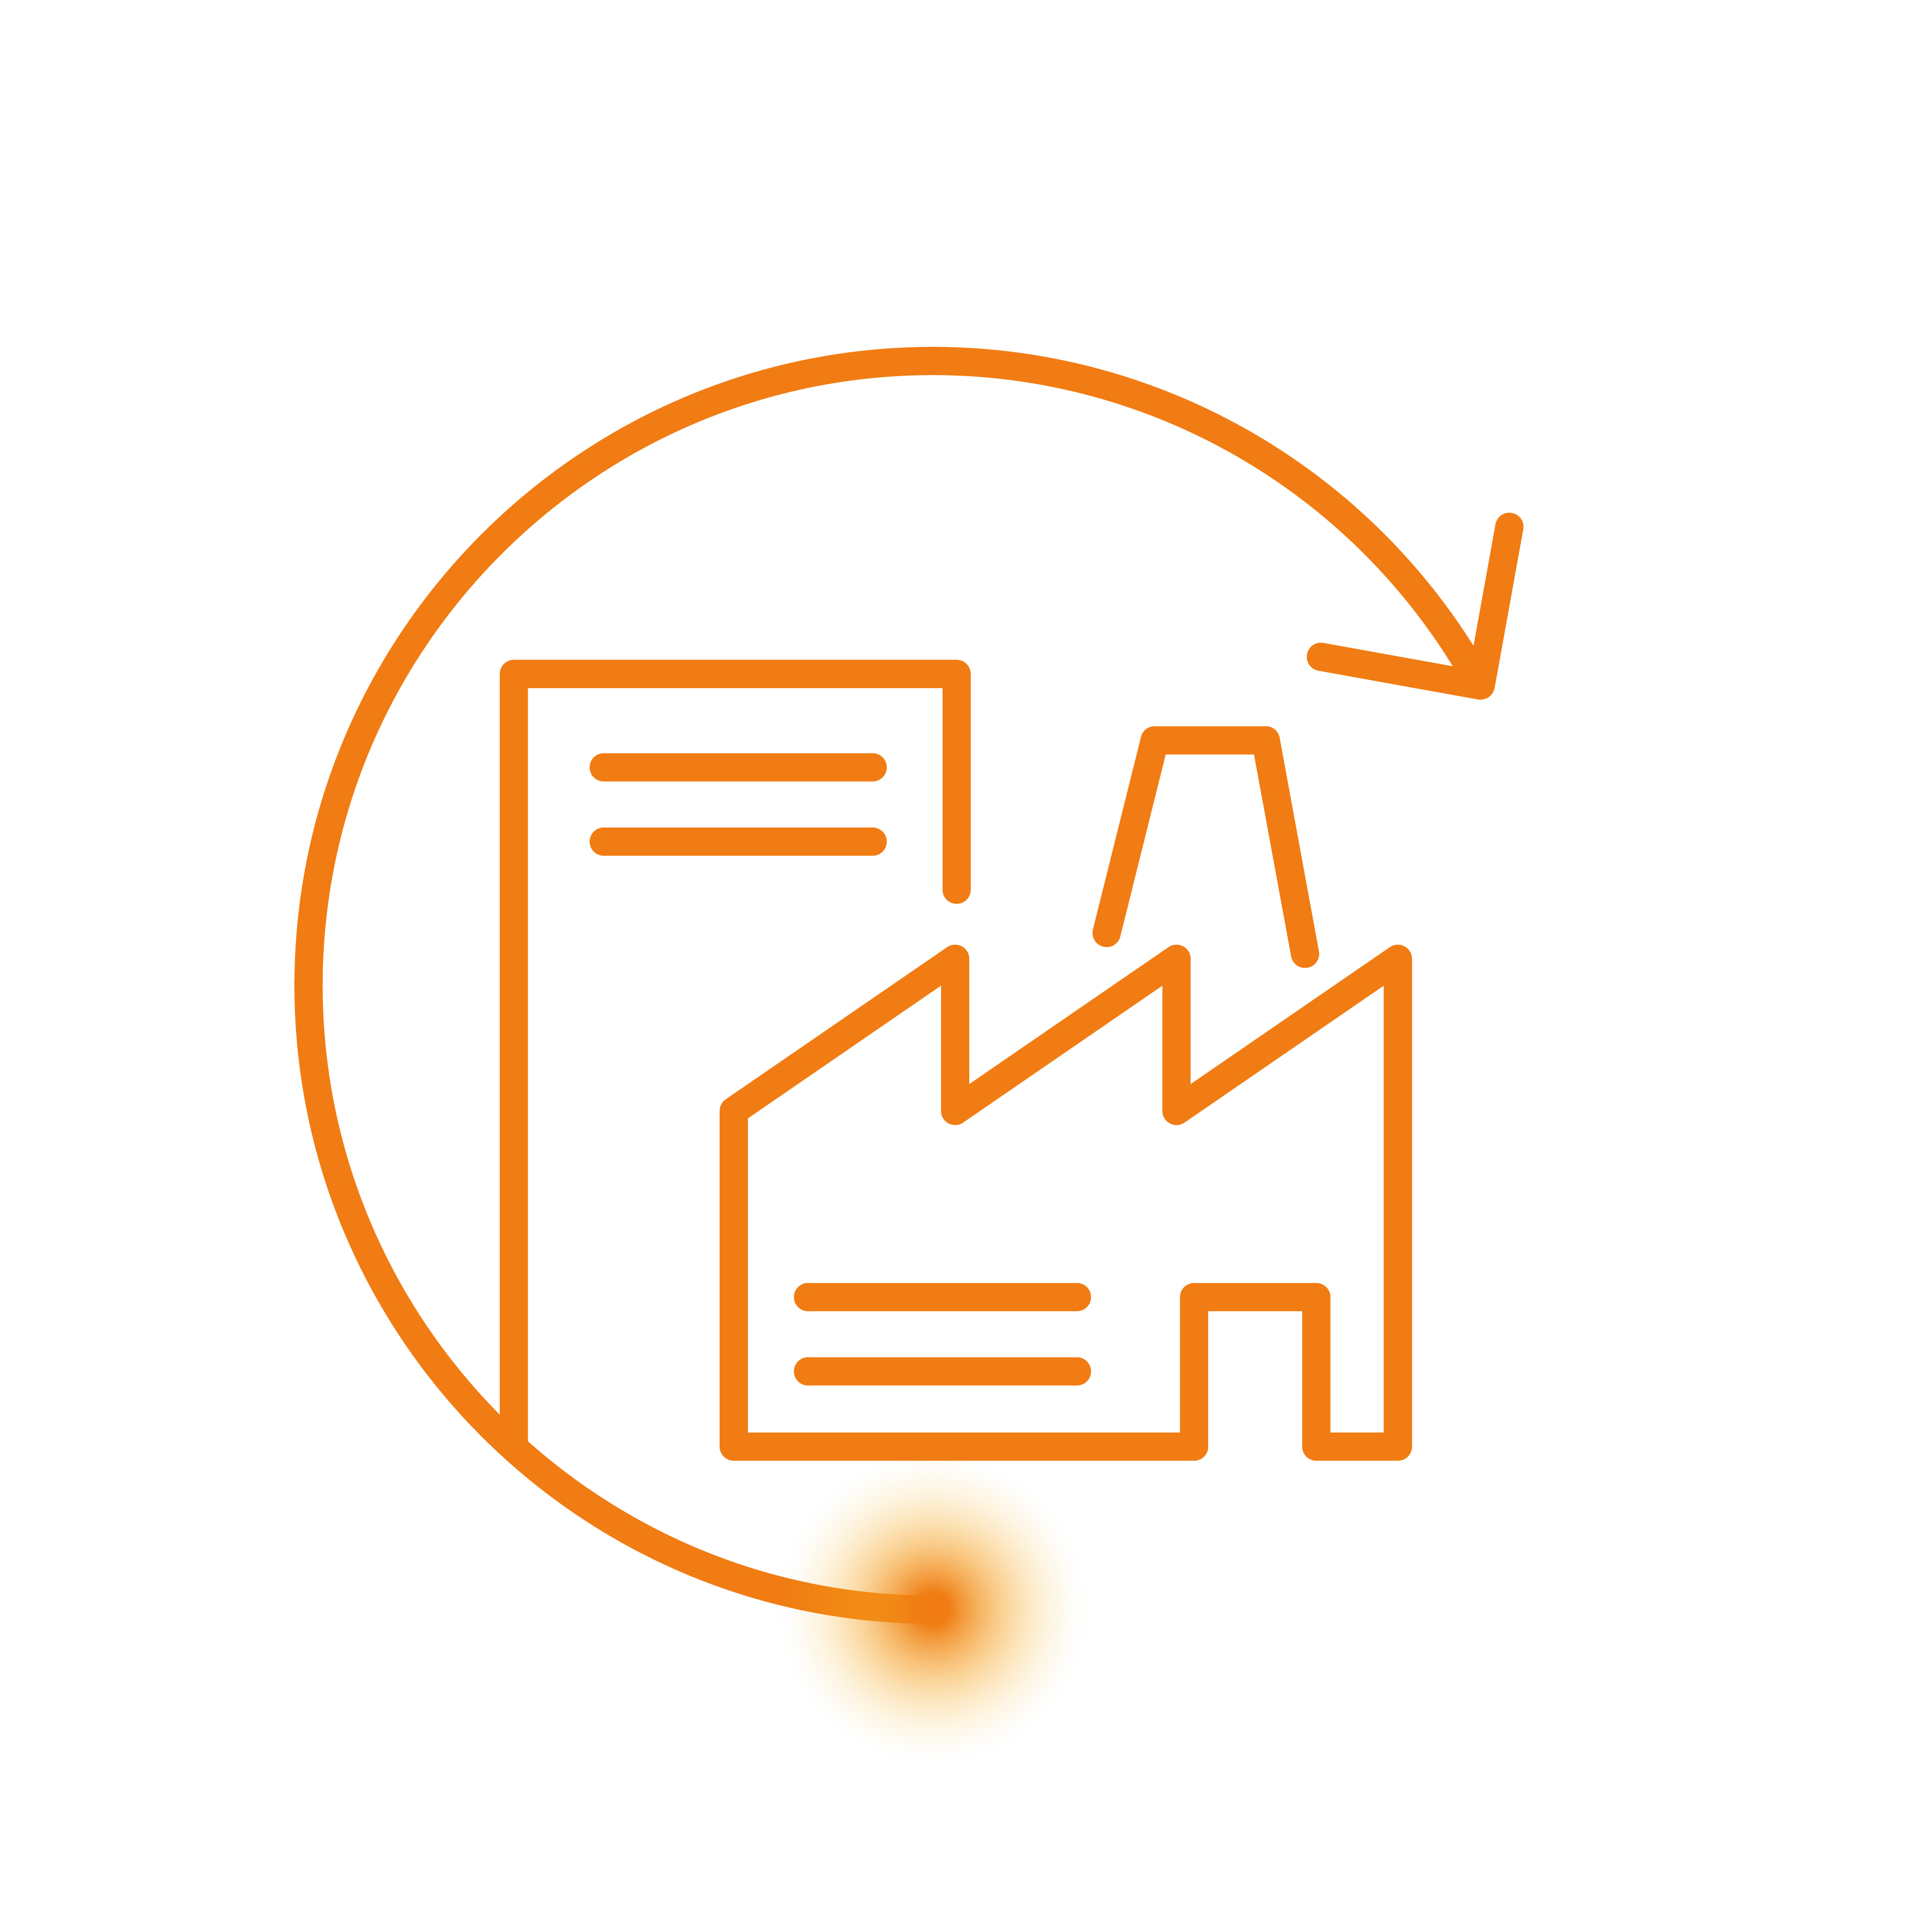 Final product icons-Facilities Management - Orange.png